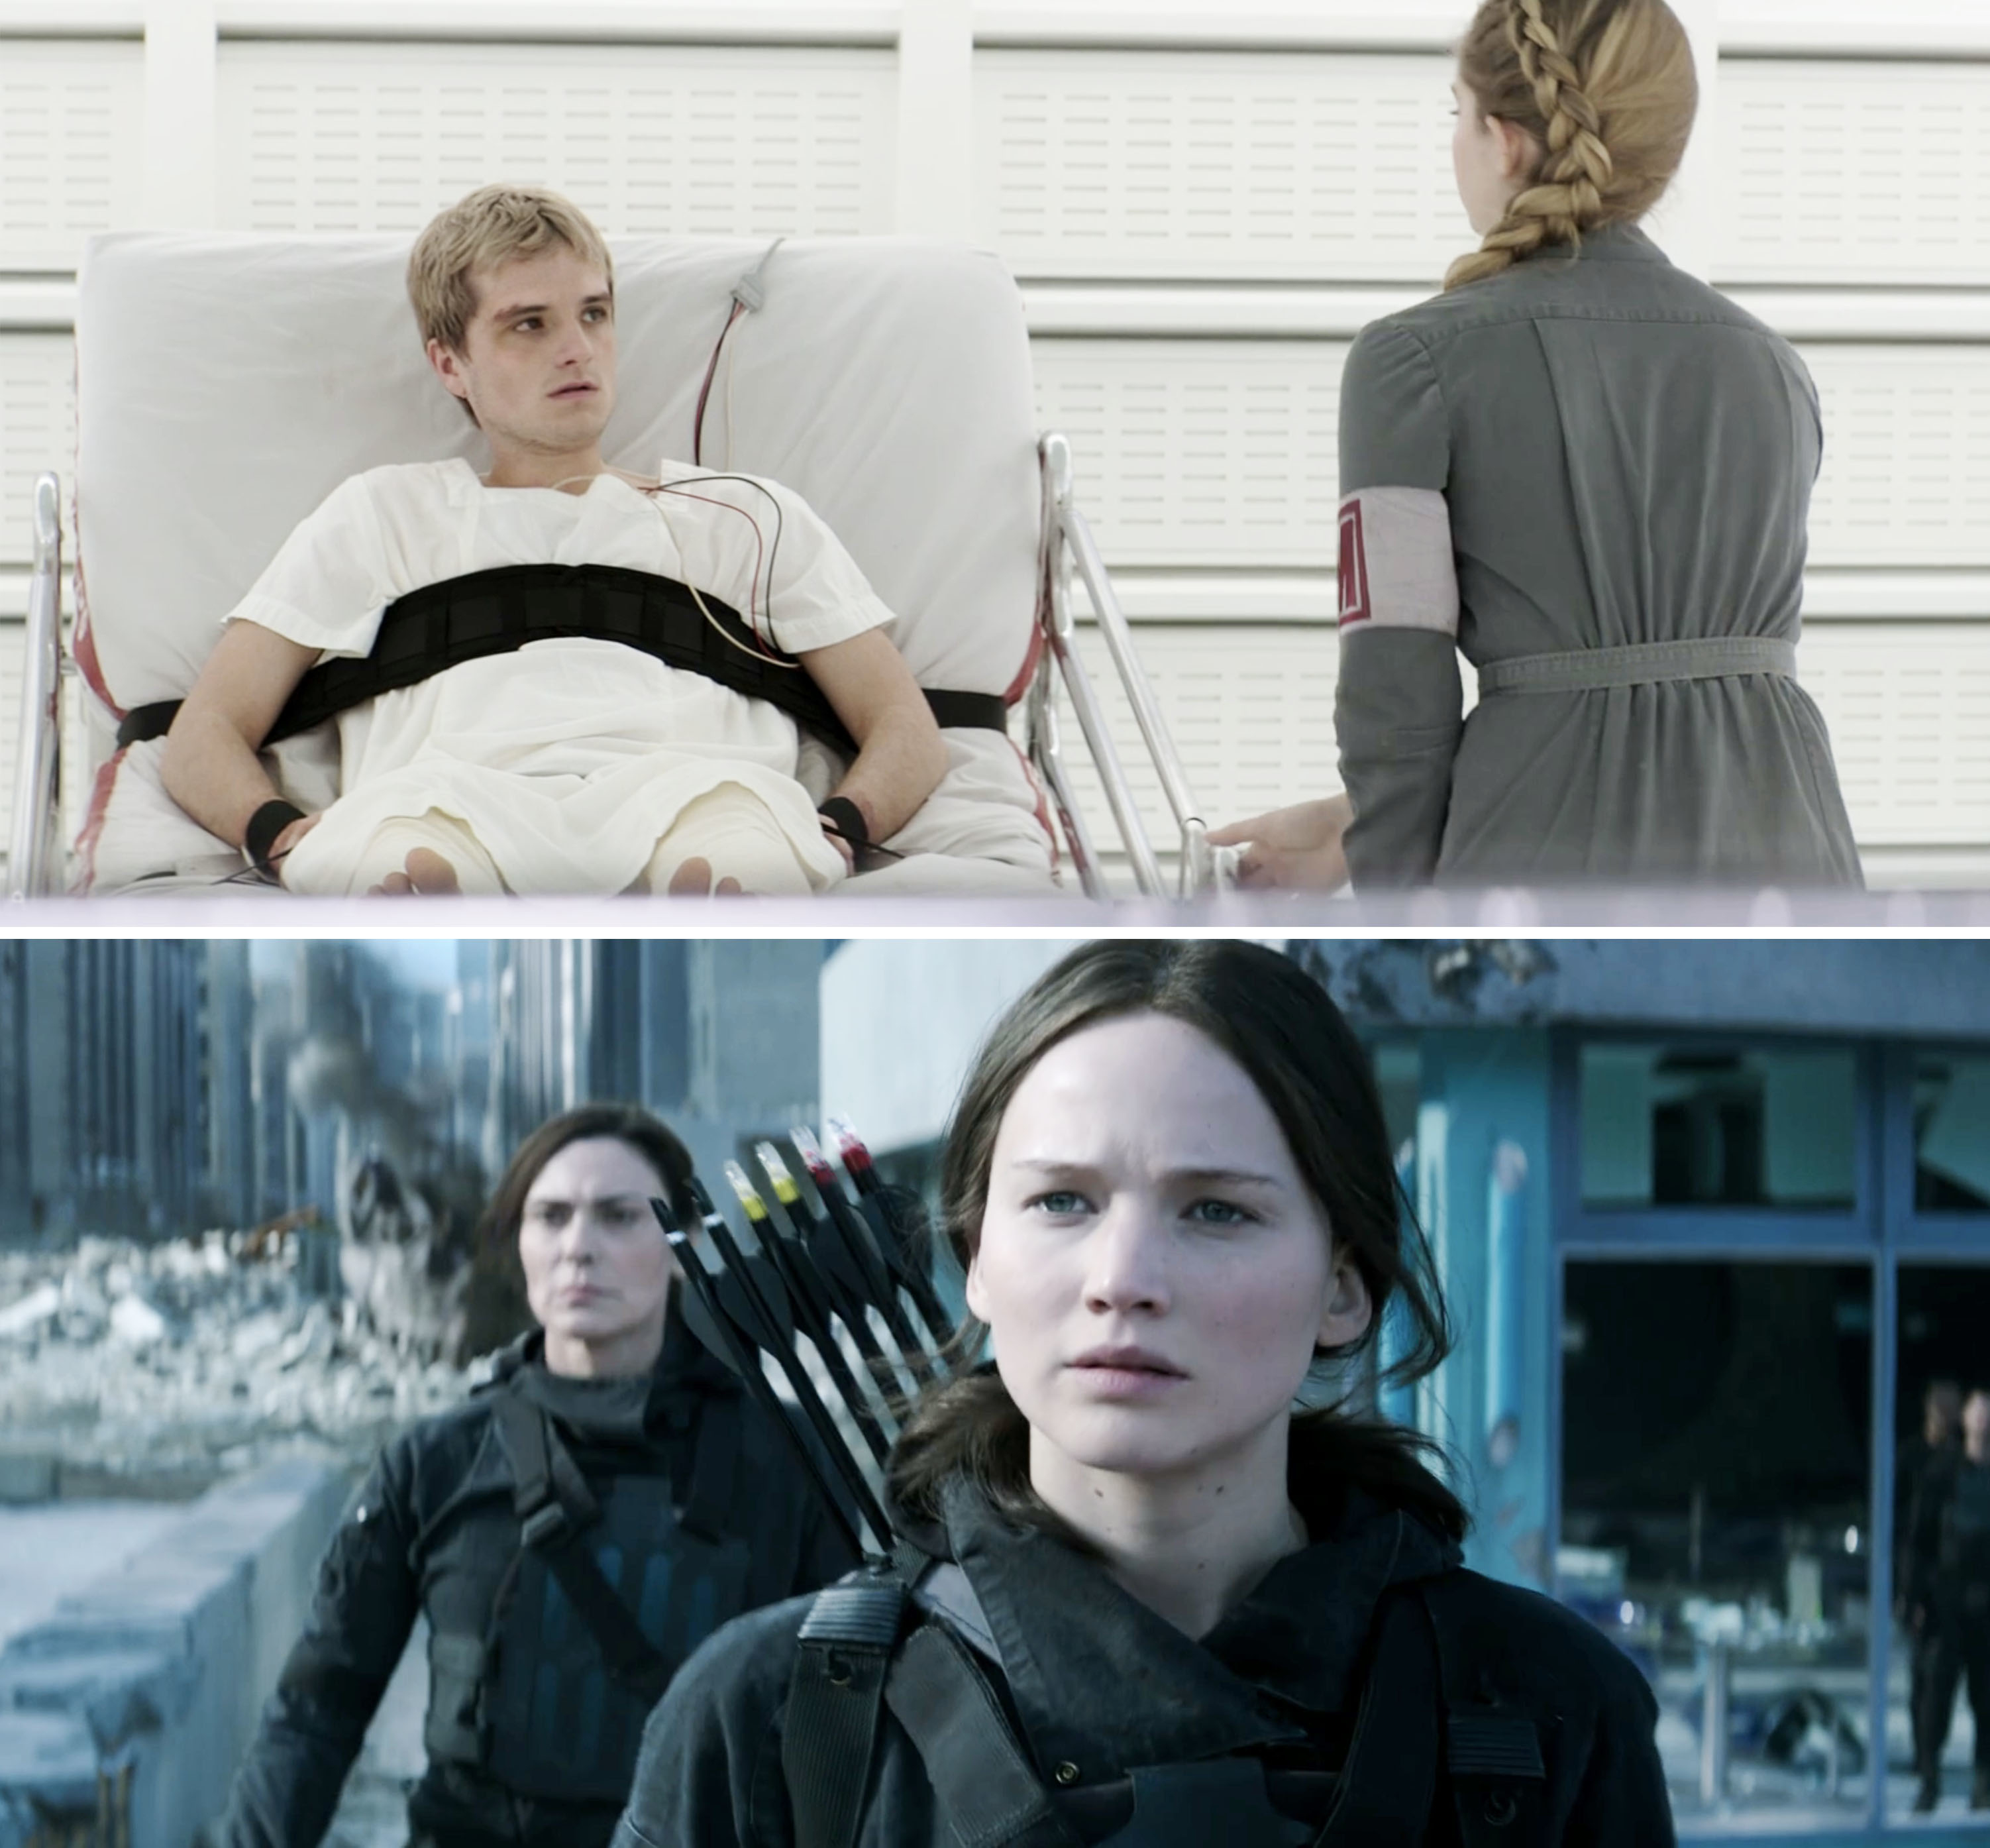 scene where a man is in a hospital bed as someone visits and then two characters with weapons in the city